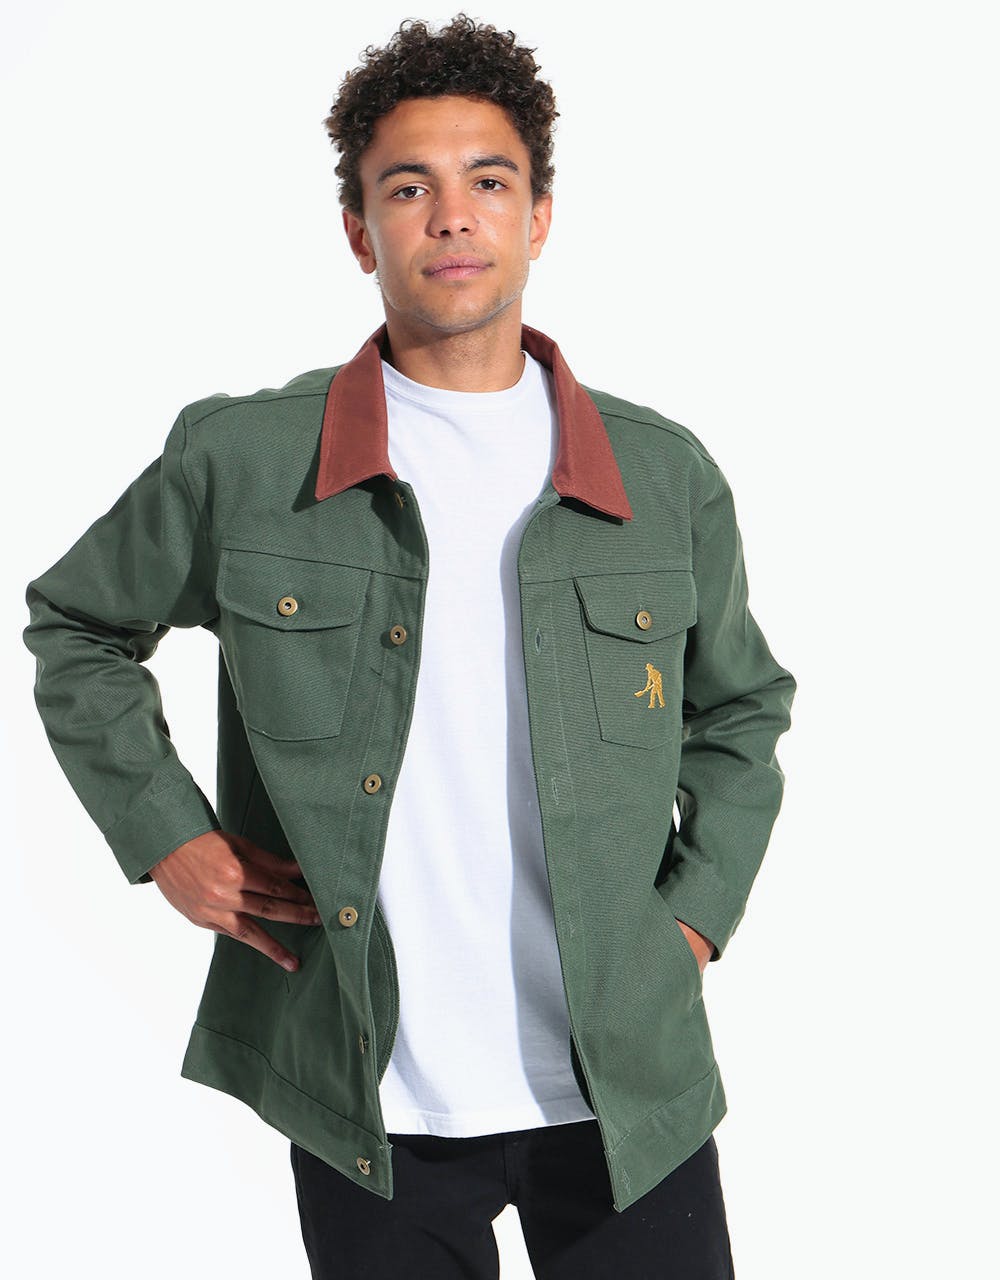 Pass Port Workers Late Jacket - Moss